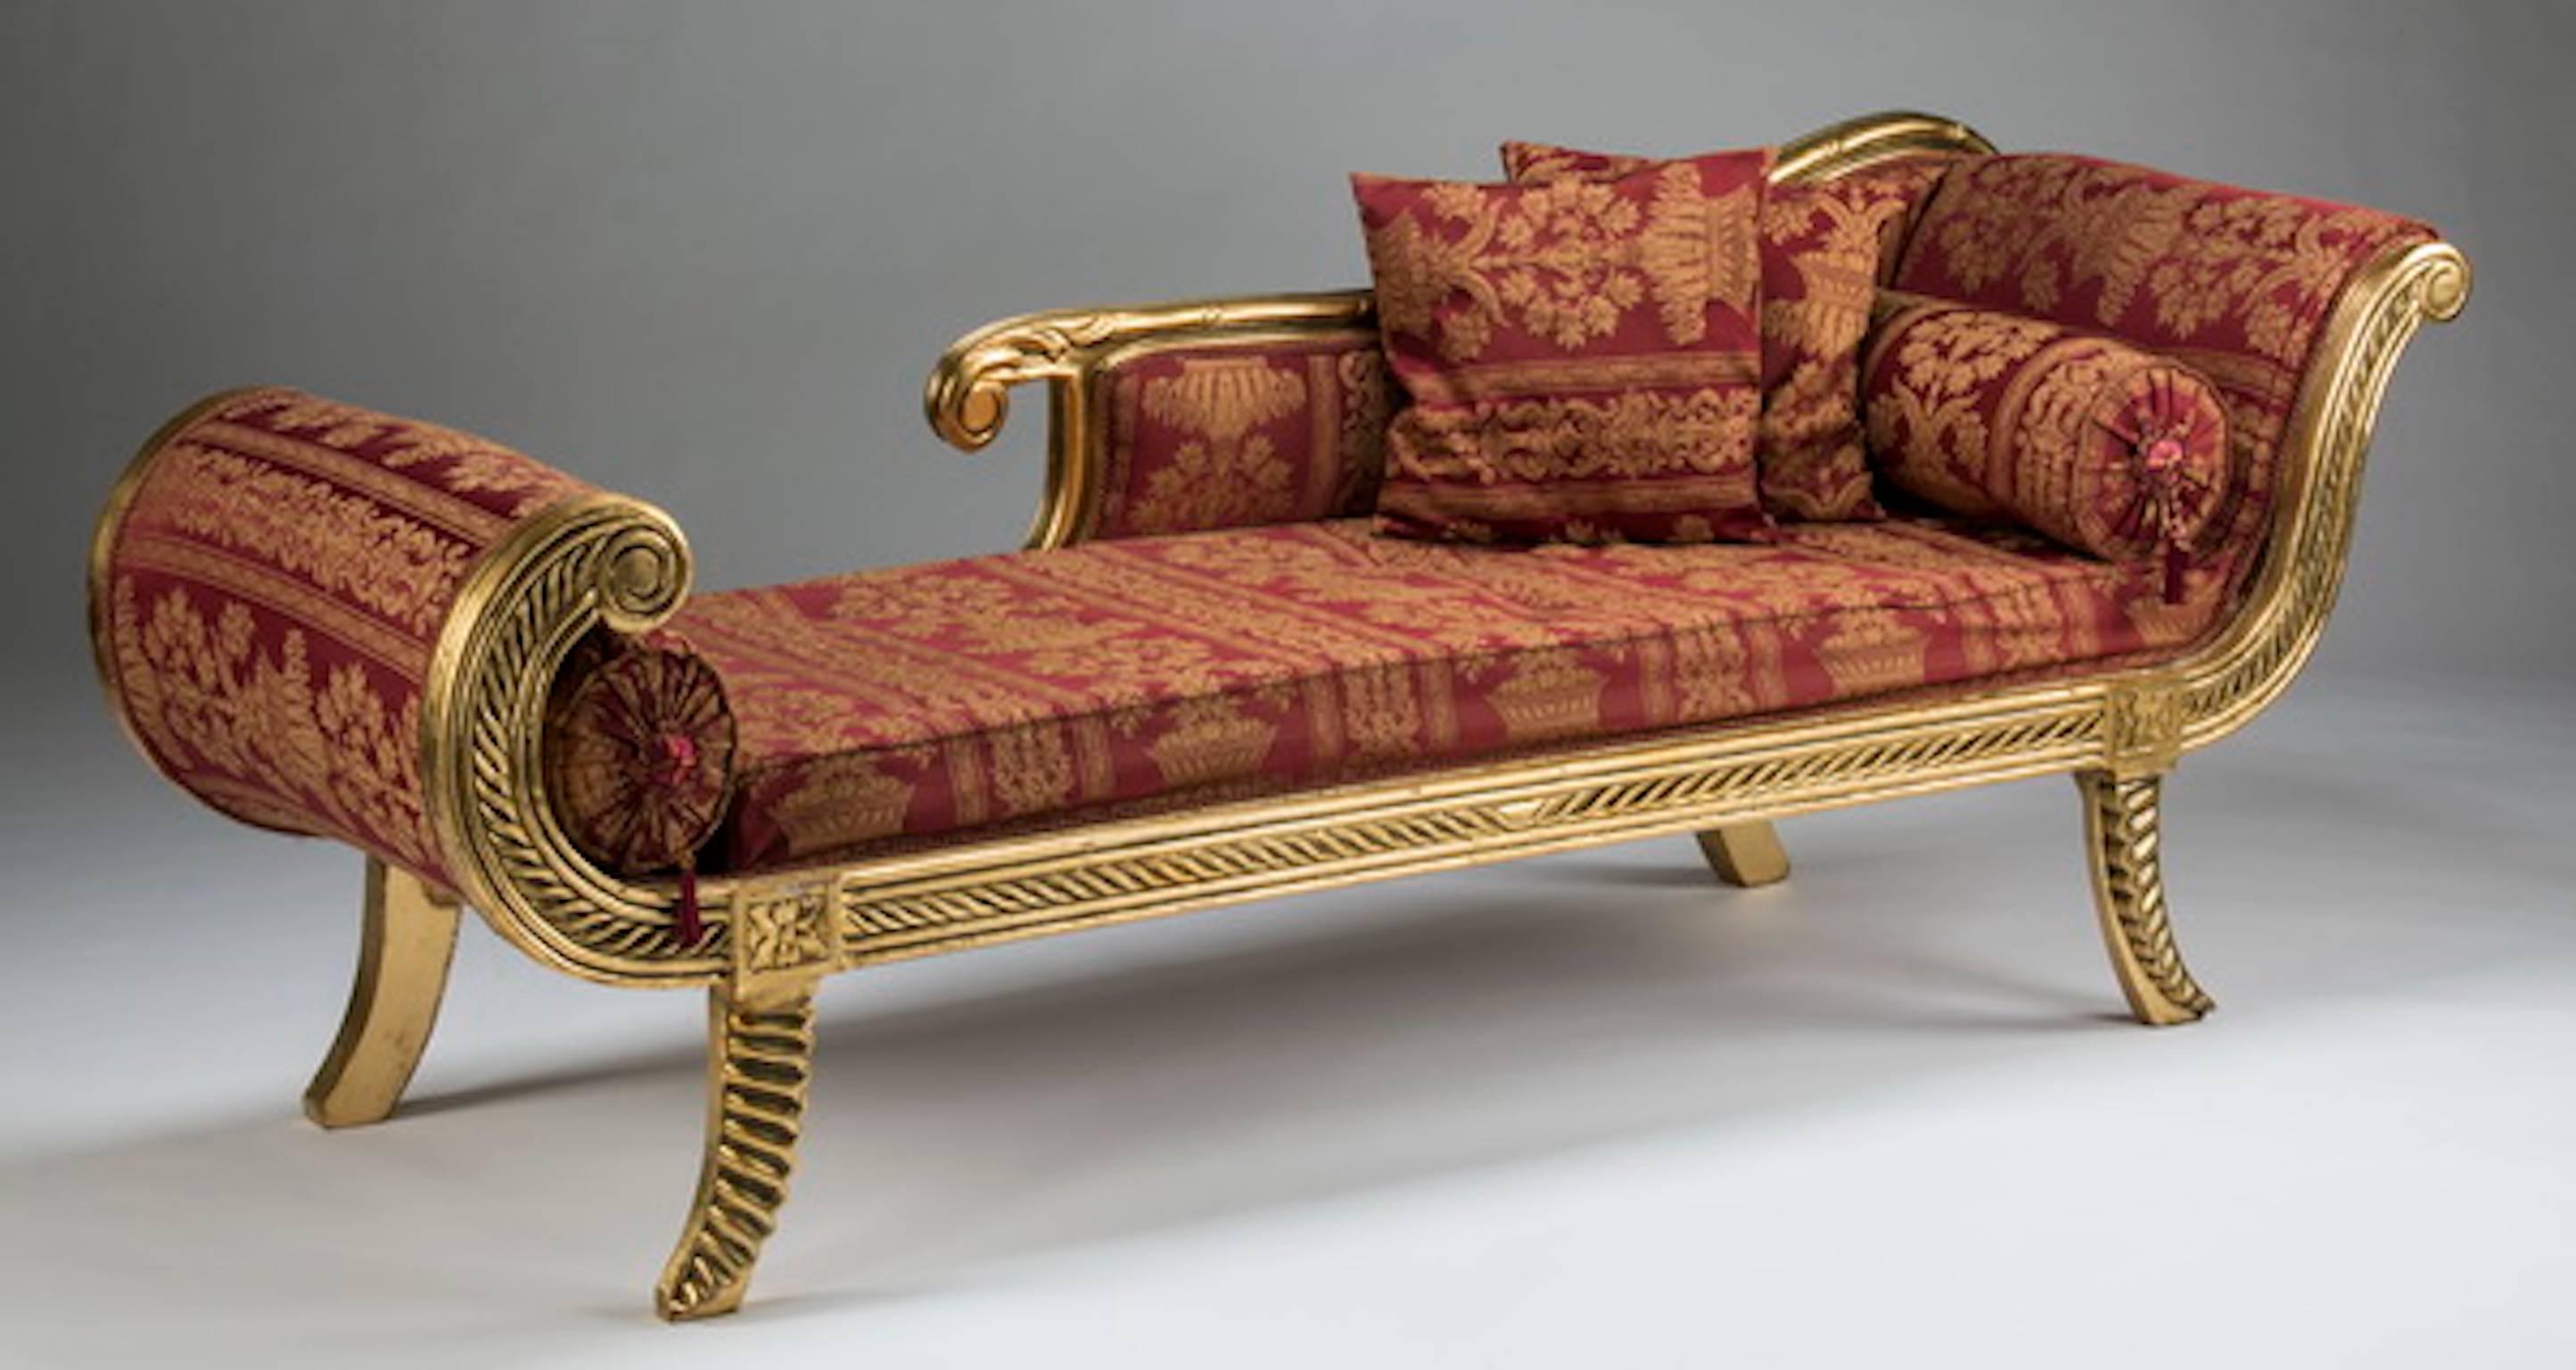 Empire style carved and paint-decorated chaise longue, the reeded hardwood frame upholstered in pink floral embroidered jacquard with associated bolsters and throw pillows, the whole rising on four out swept feet. Measures: 27